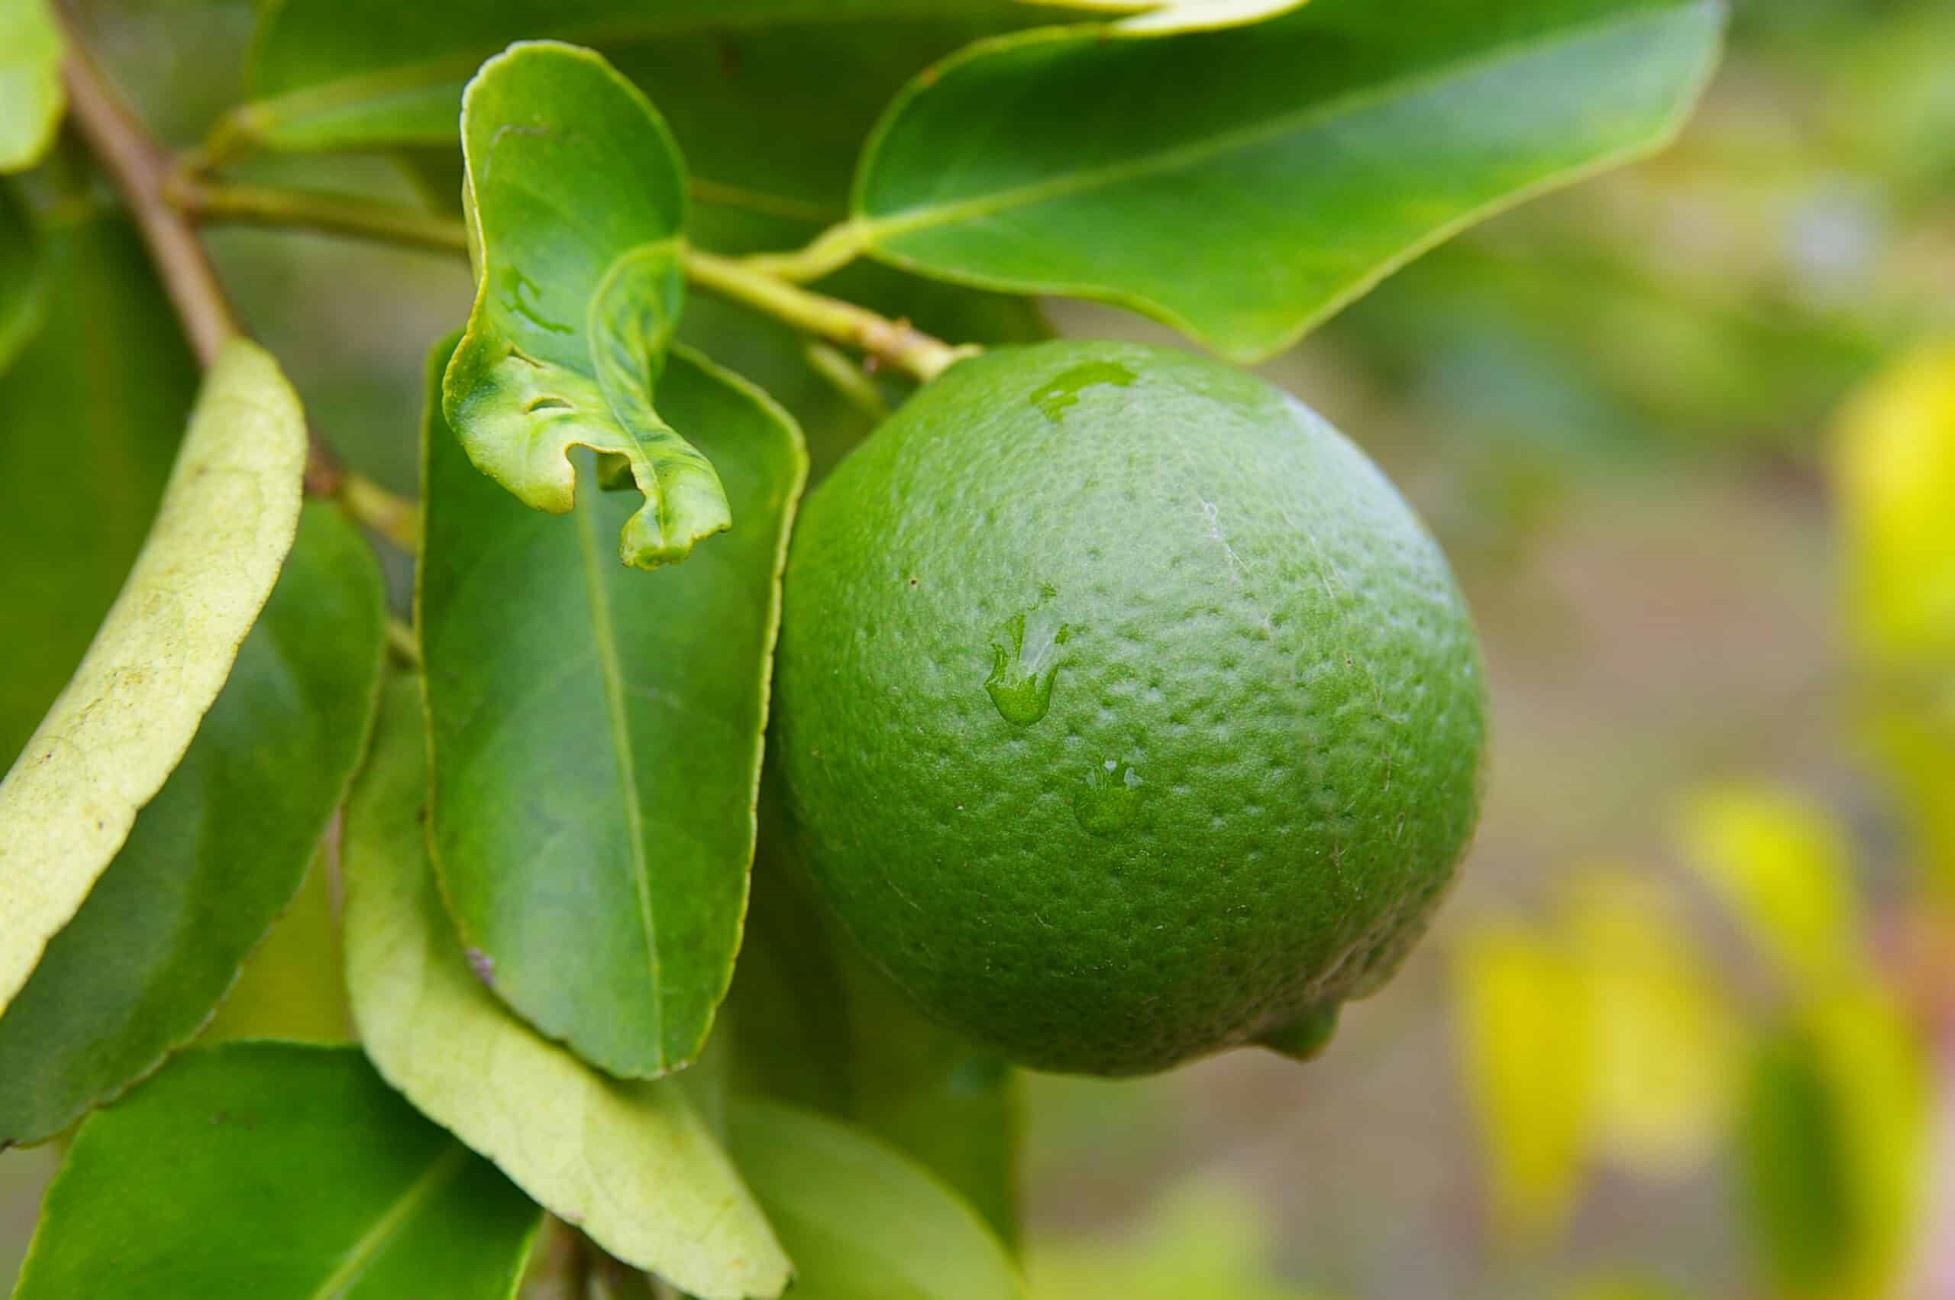 How Do Limes Grow Without Seeds